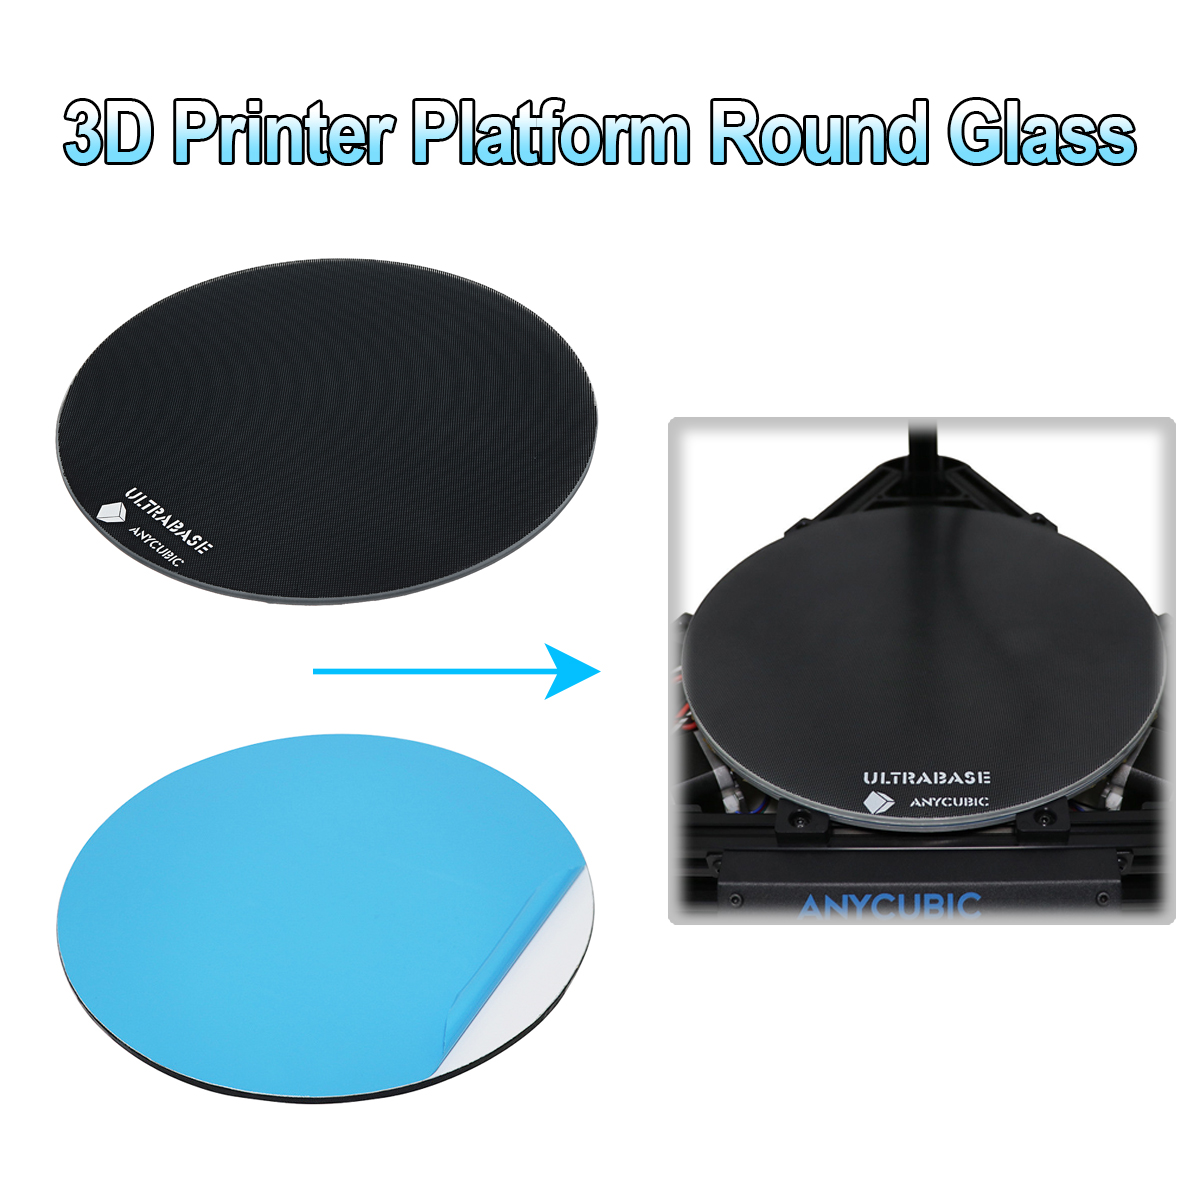 Anycubic 240mm*4mm Ultrabase Round Glass Build Plate Hot Bed Platform For 3D Printer 7